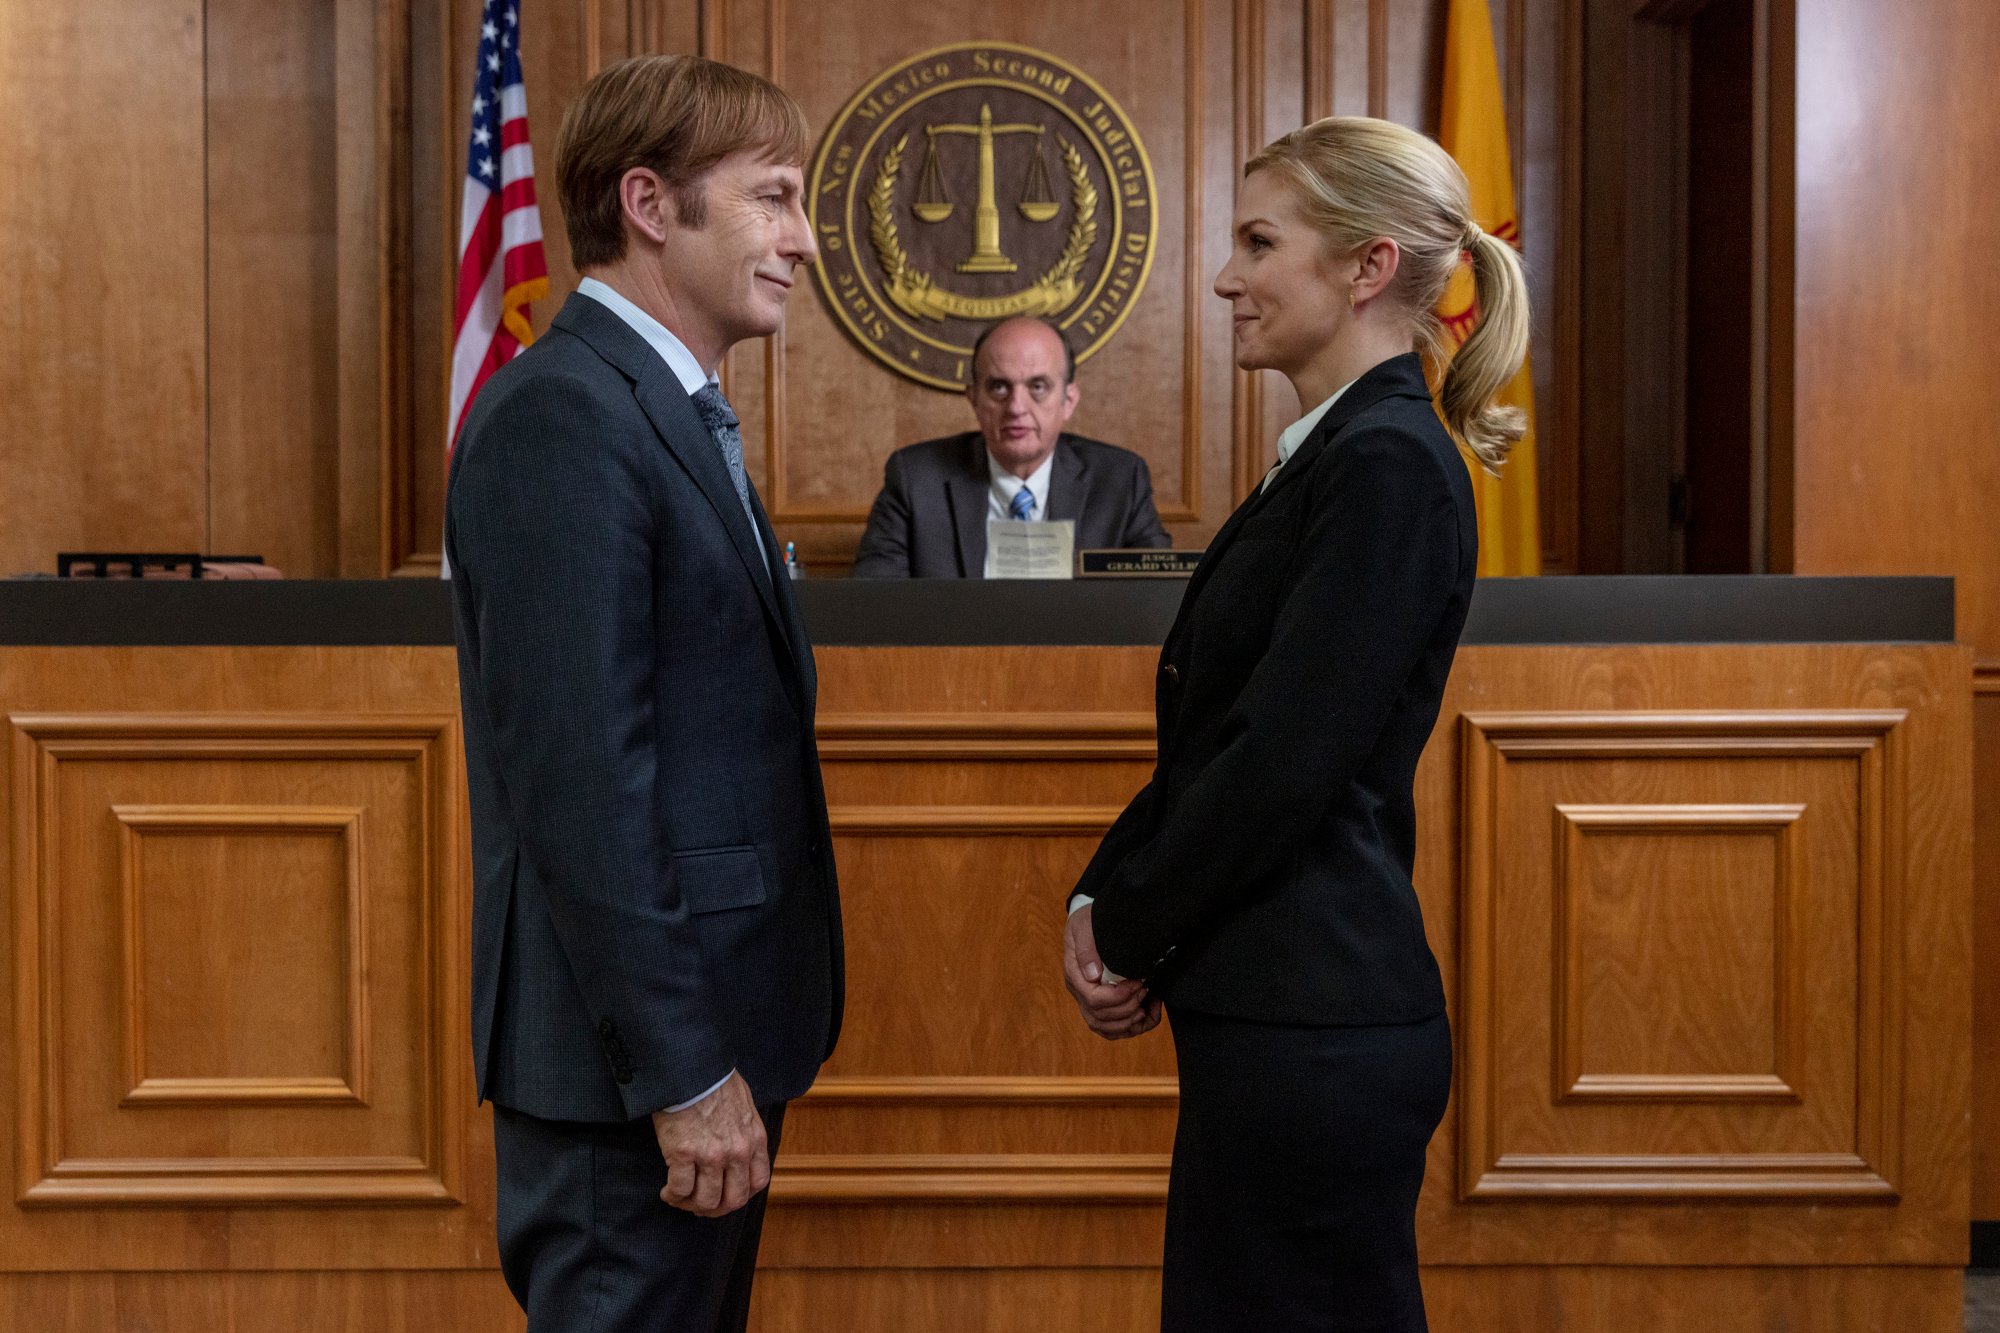 Bob Odenkirk and Rhea Seehorn as Jimmy McGill and Kim Wexler in 'Better Call Saul' Season 5. They're standing before a judge and getting married. They're both wearingg dark suits and facing one another.